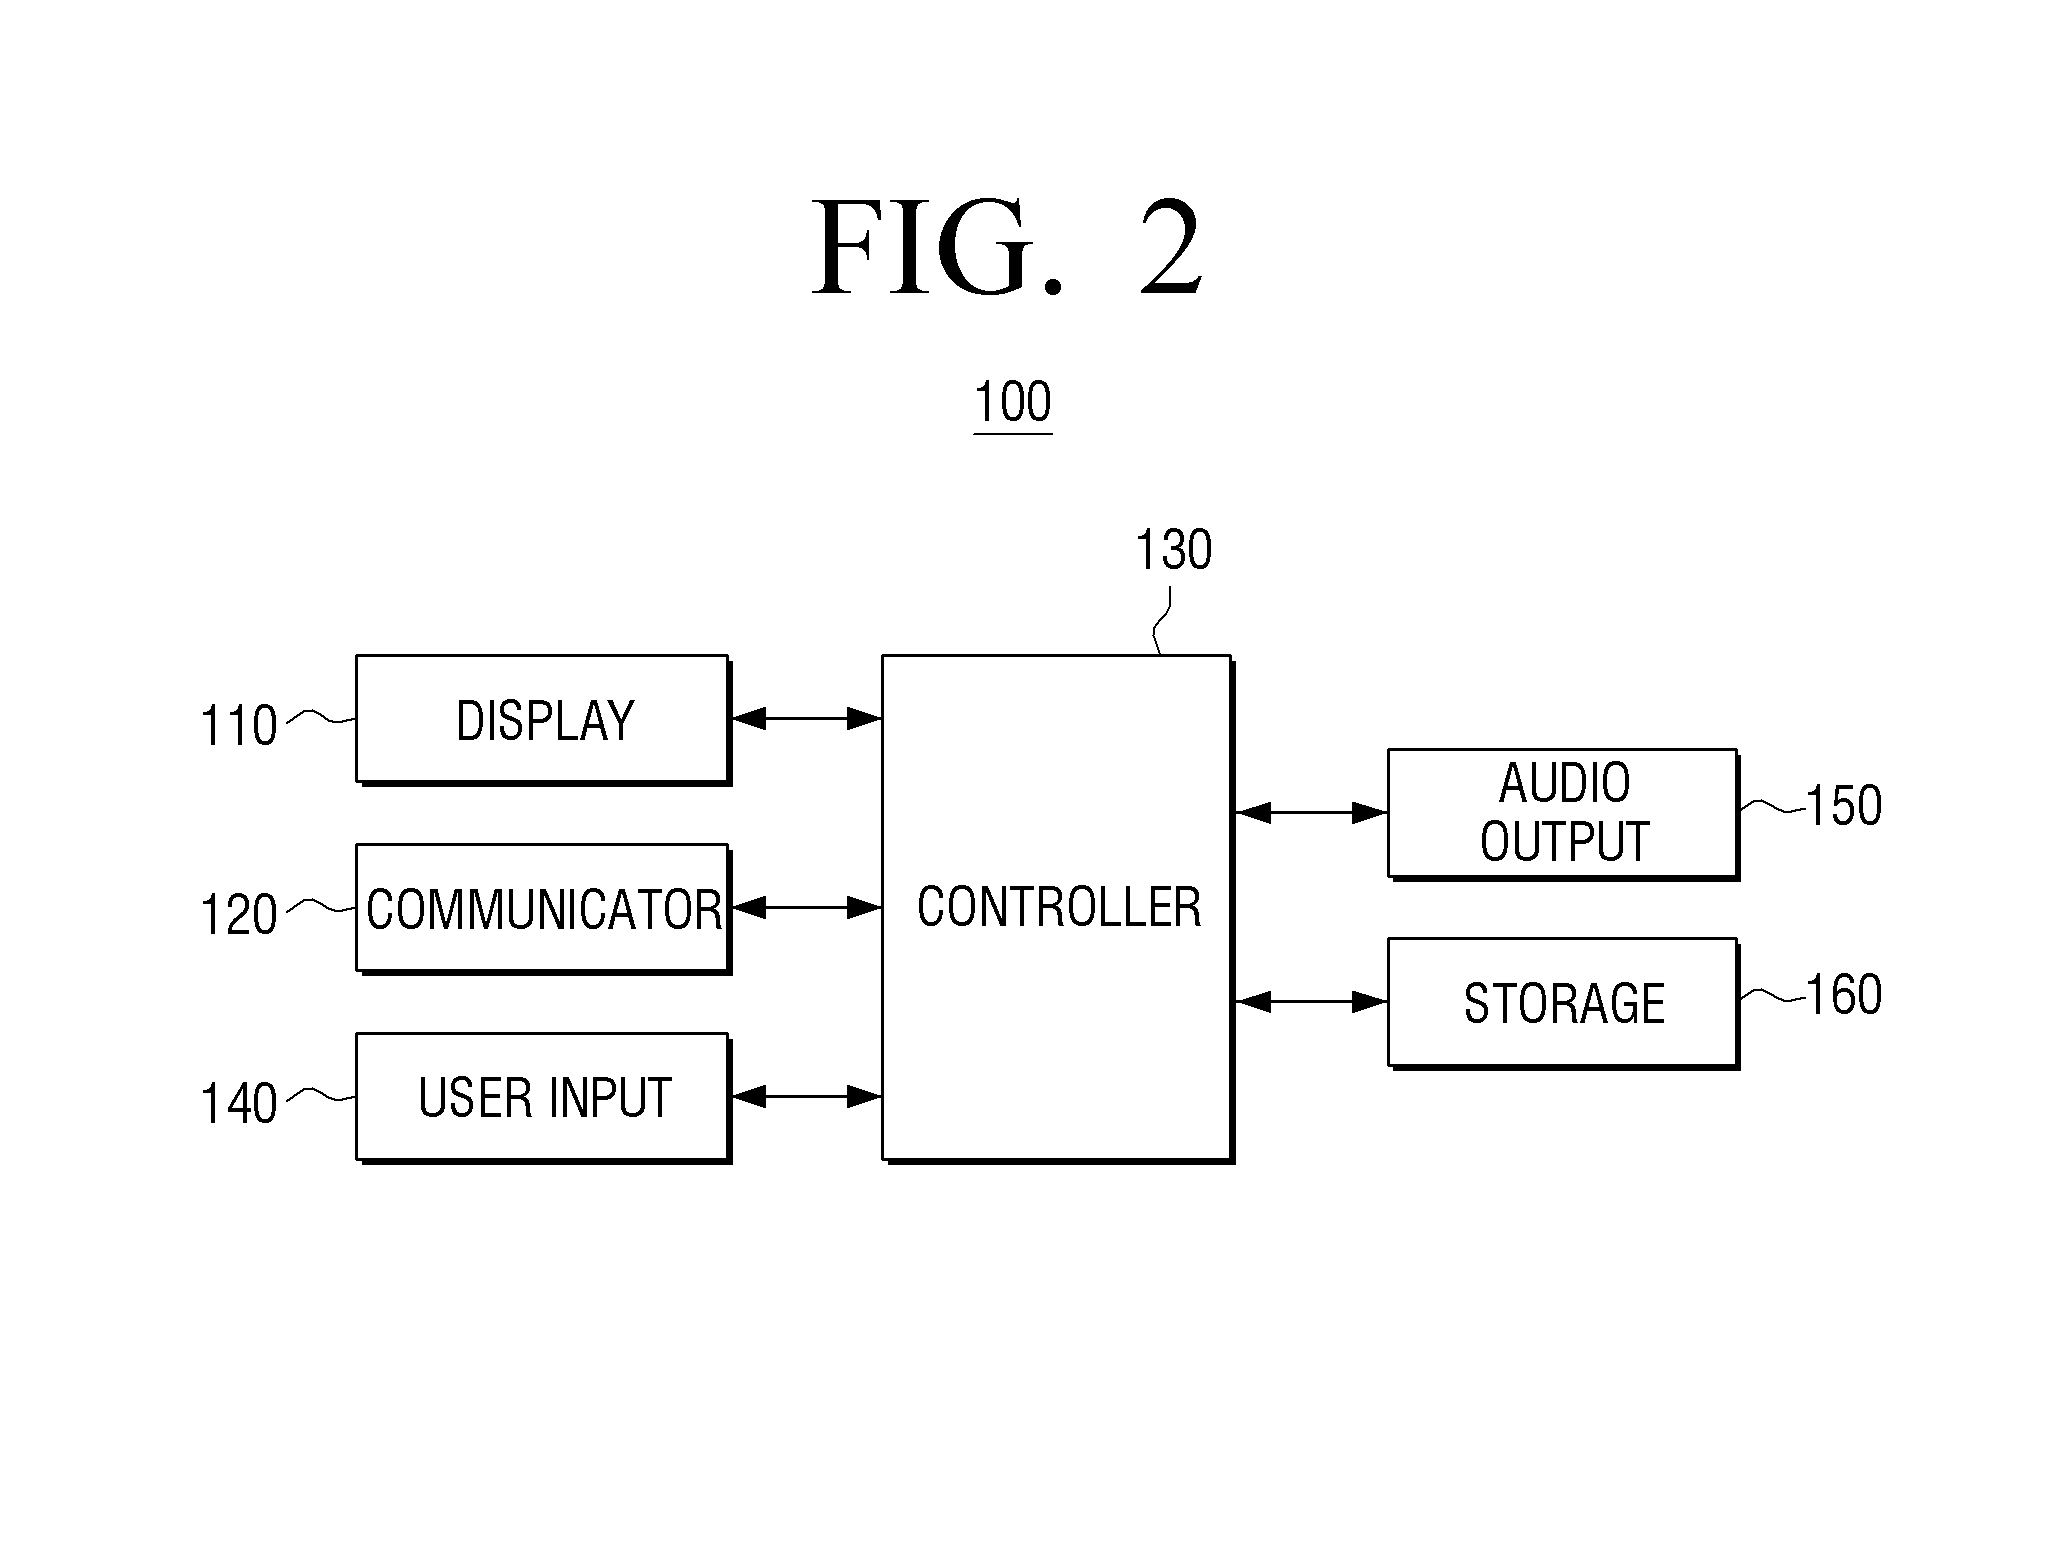 Display apparatus and method of setting a universal remote controller